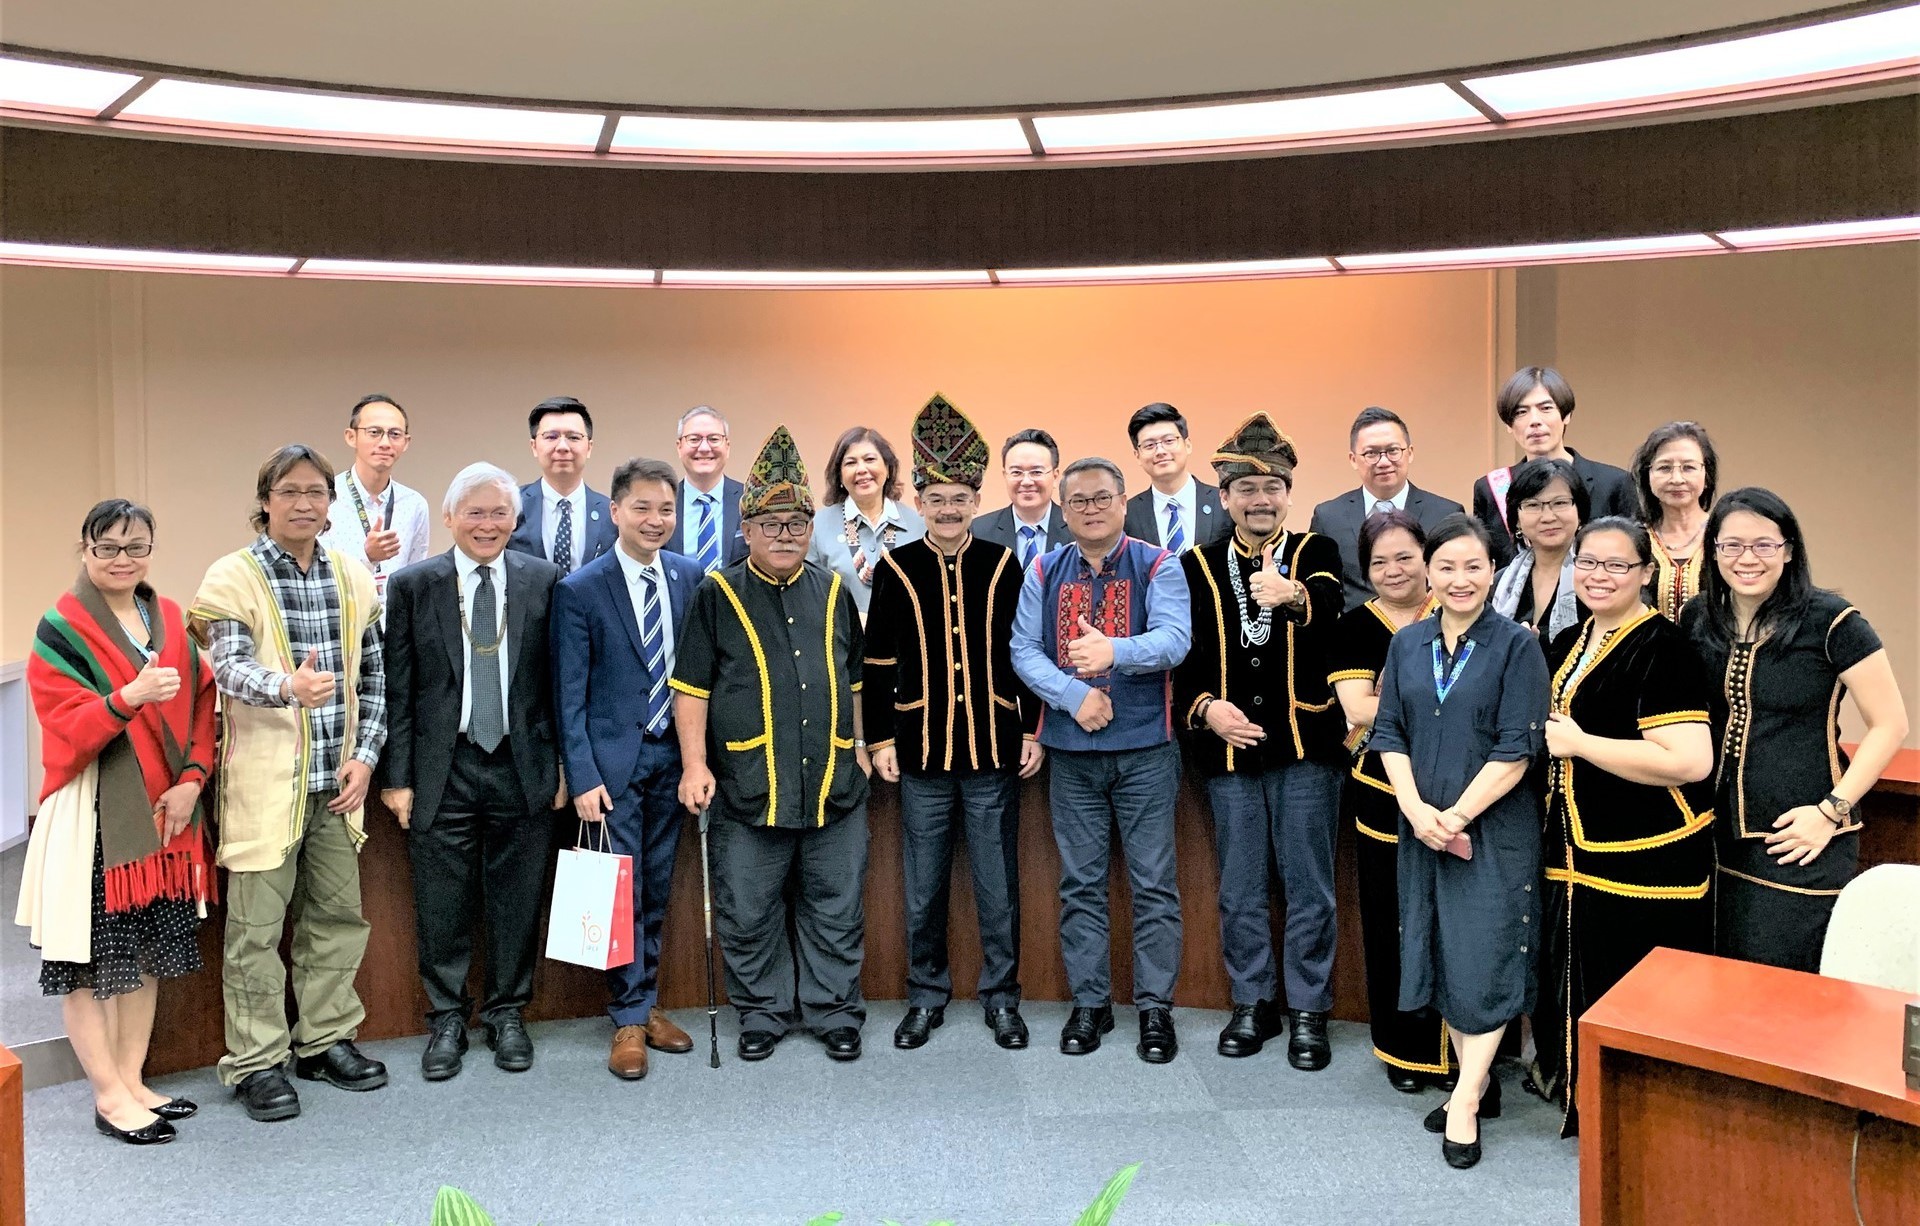 Group photo was taken at the Taiwan Indigenous TV. The third from the left in the first row: Datuk Alexnder Decena, Roger Chin Ken Fong, Datuk Douglas Cristo Primus （former Judge of High Court）, Datuk Martin Mairin Idang （Judge of High Court）, Kacaw Fuyan （CEO of Taiwan Indigenous TV）, and Datuk John Sikayun